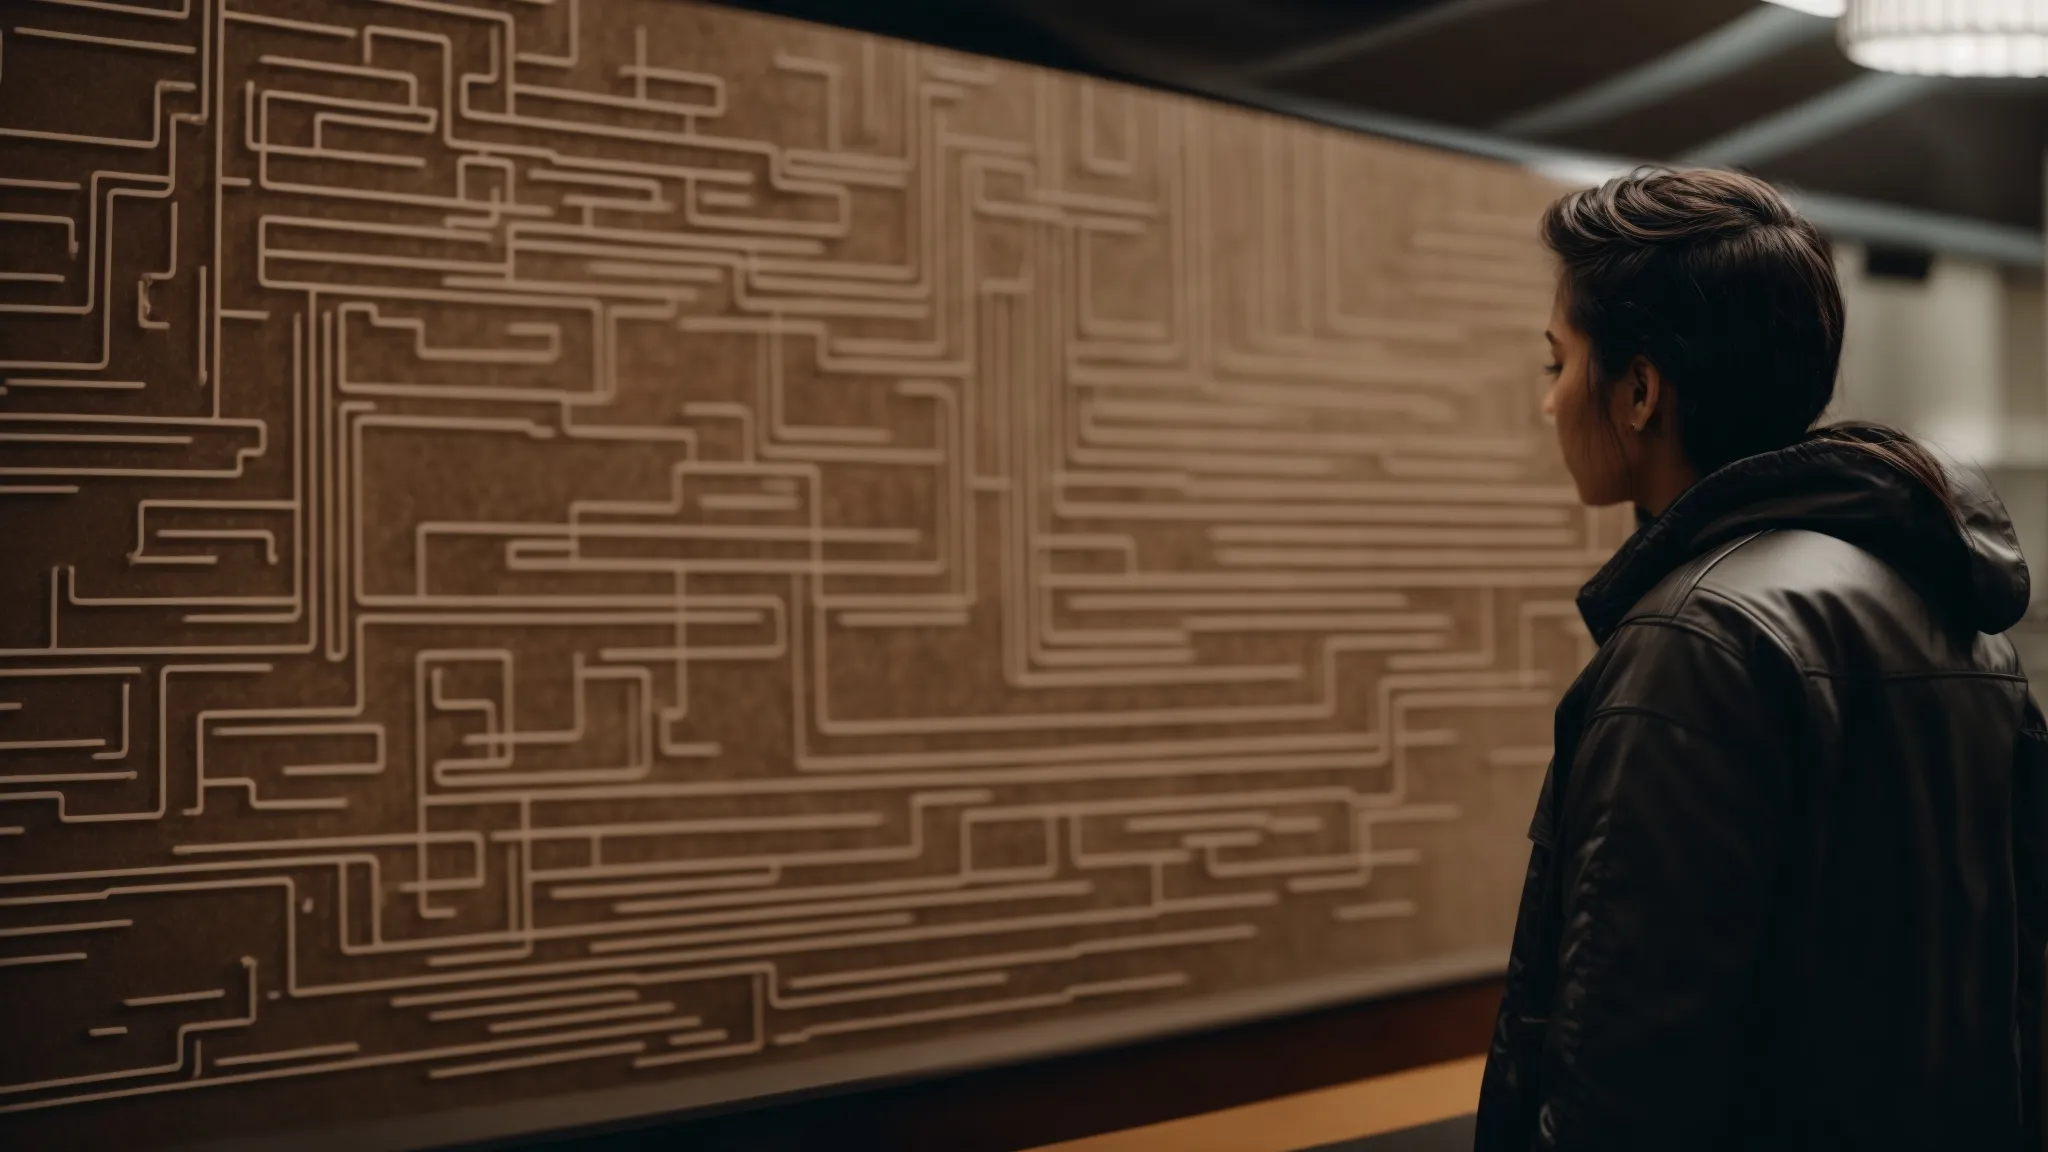 a person looking perplexed while staring at a large, maze-like flowchart on a computer screen.